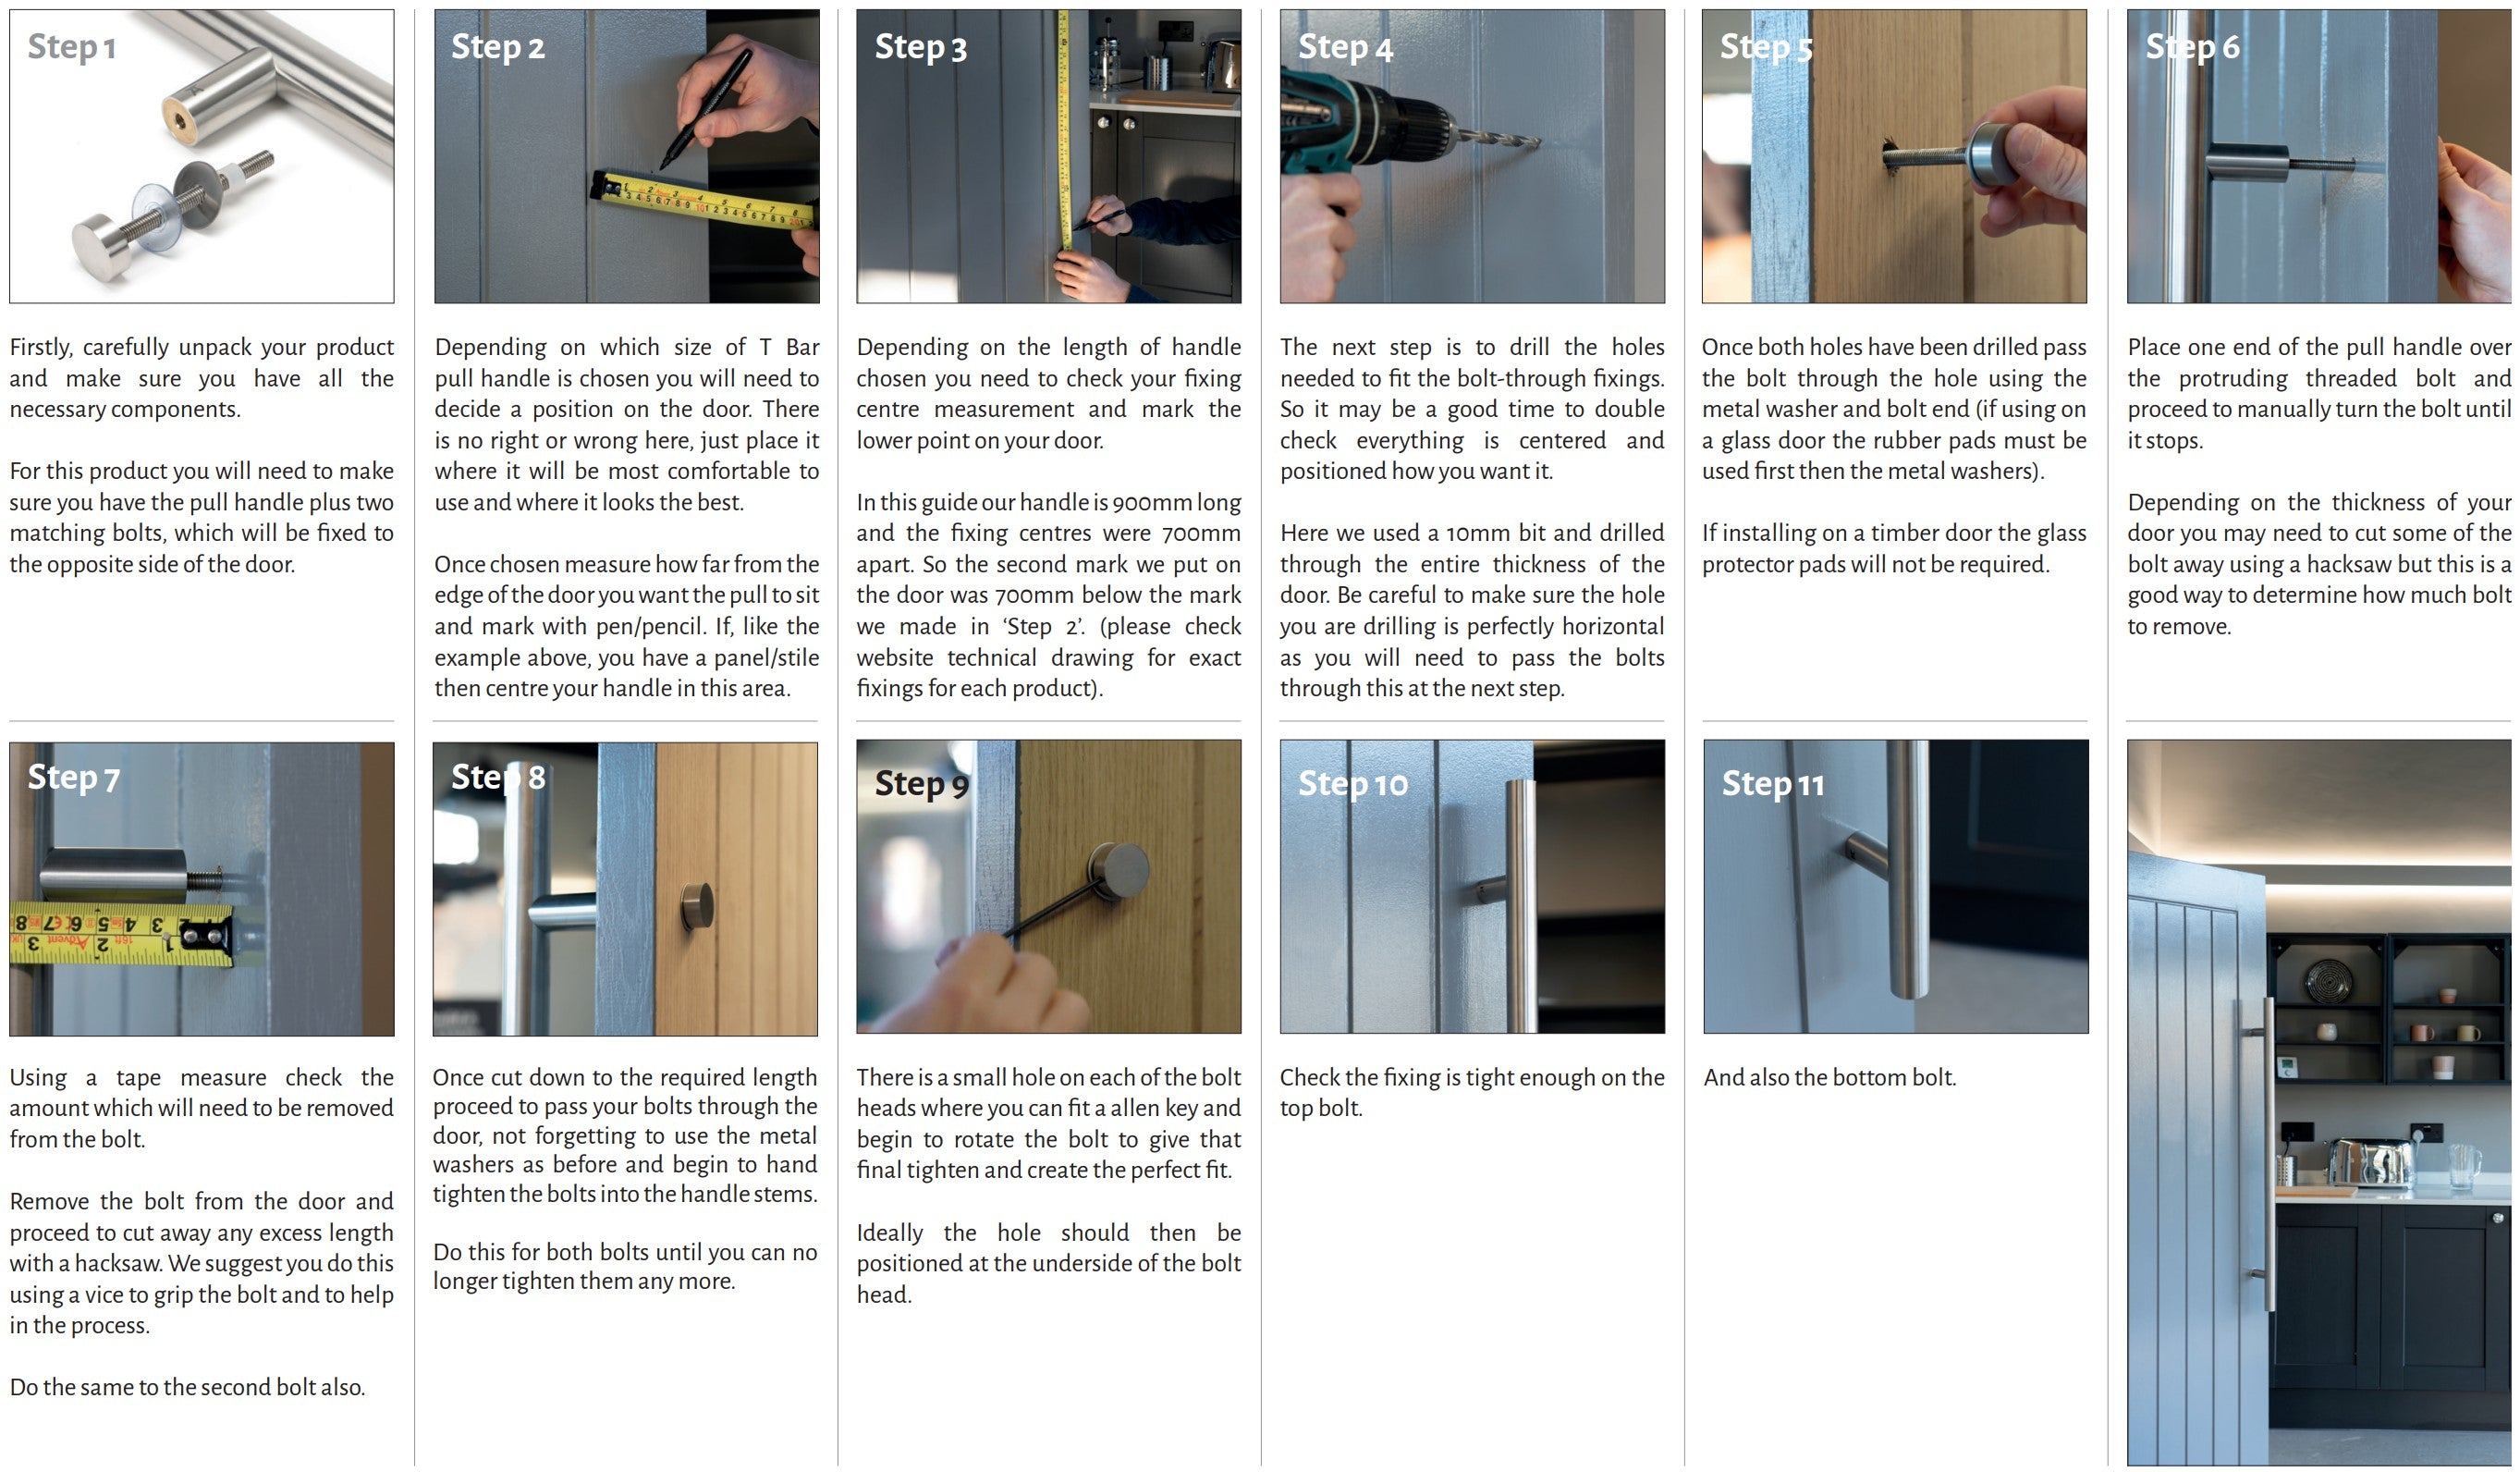 A step by step guide explaining how to fit From The Anvil's T Bar pull handles to a wooden door.